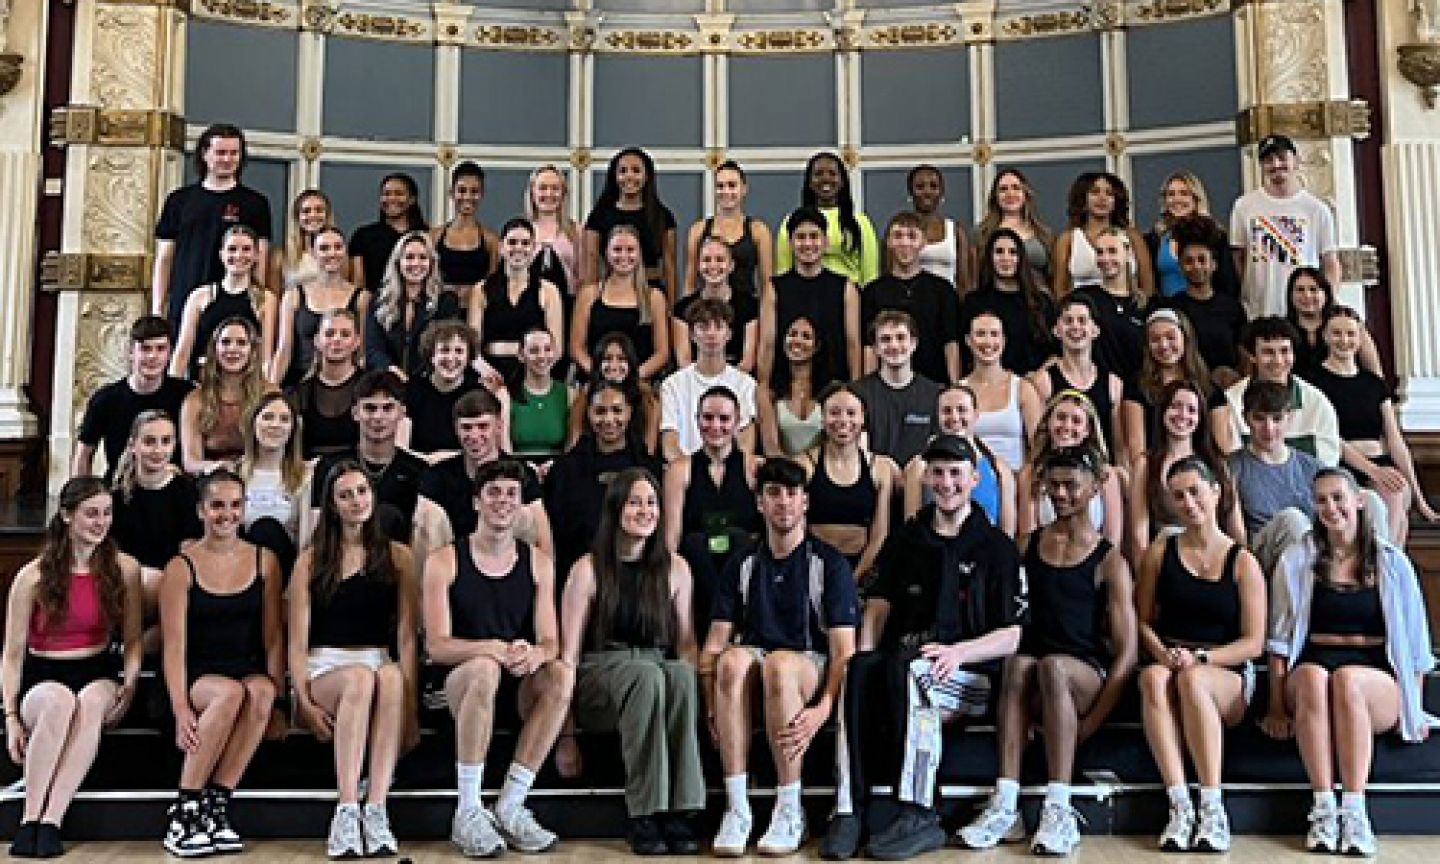 A group photo of the Urdang students